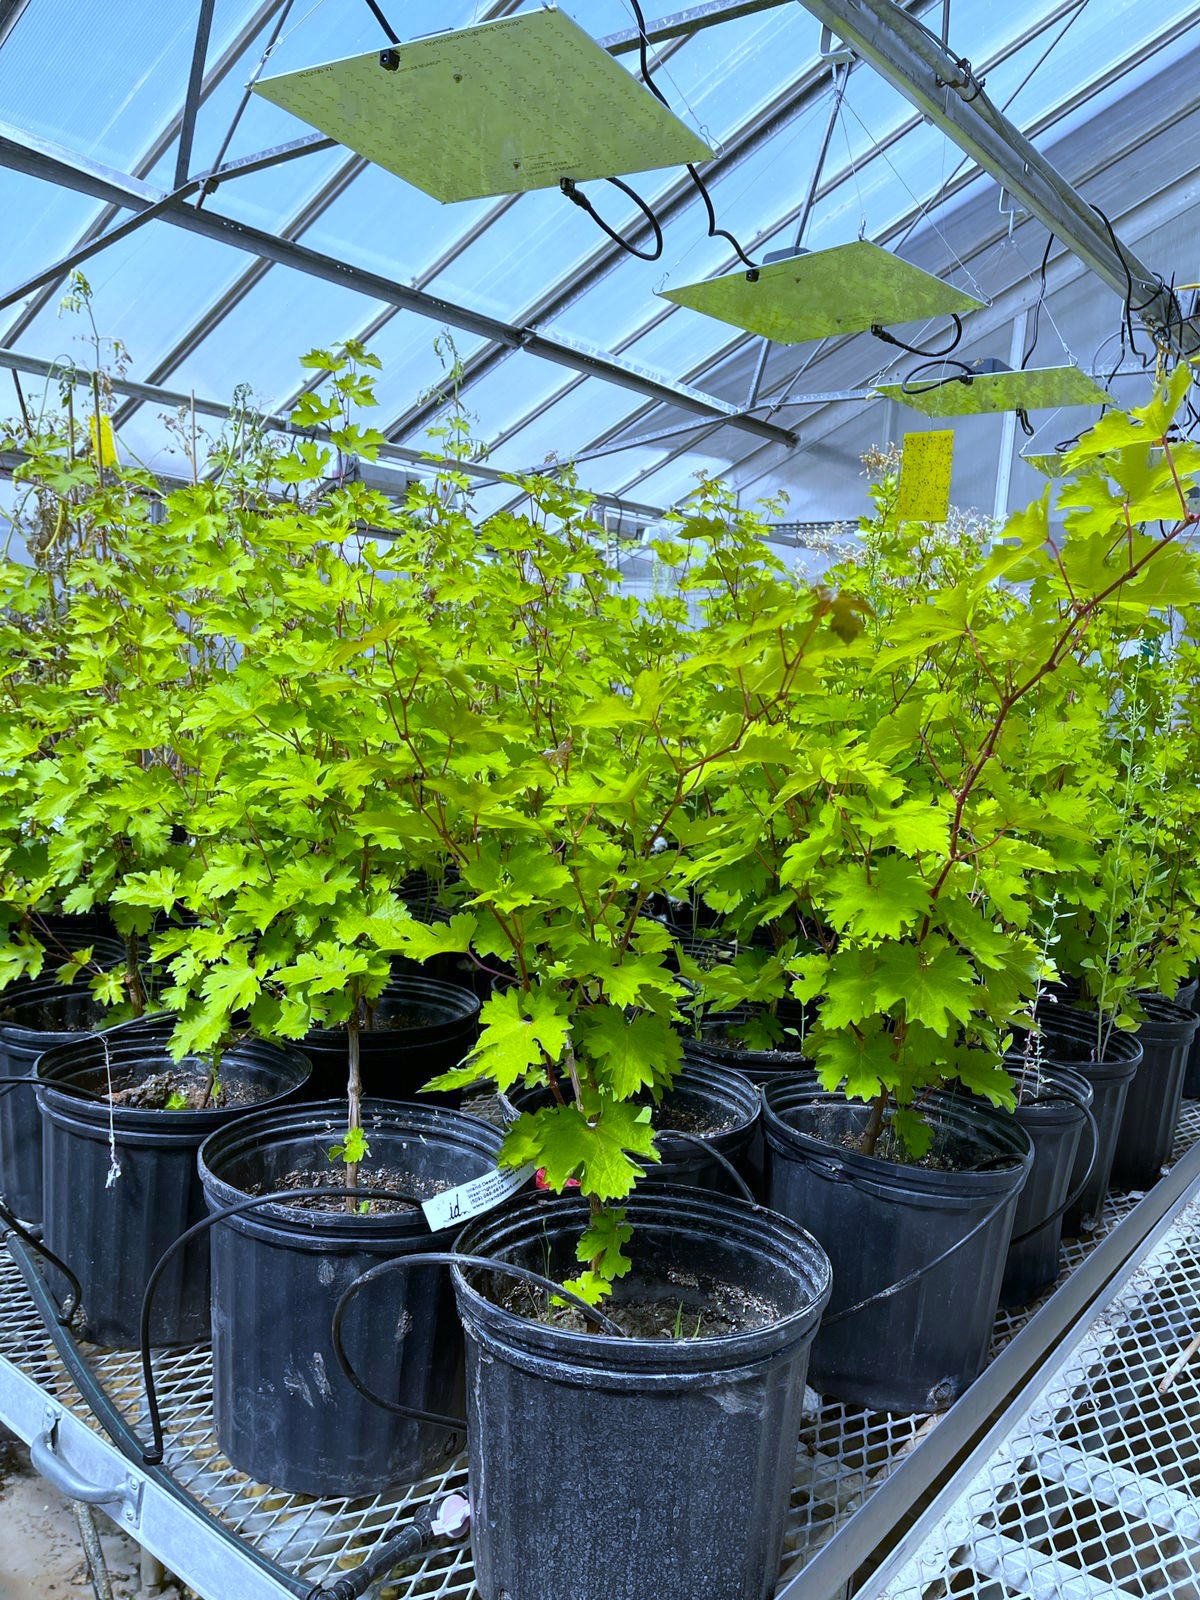 3)	Grapes in the University of Idaho greenhouse where soil amendments for the study were initially tested.